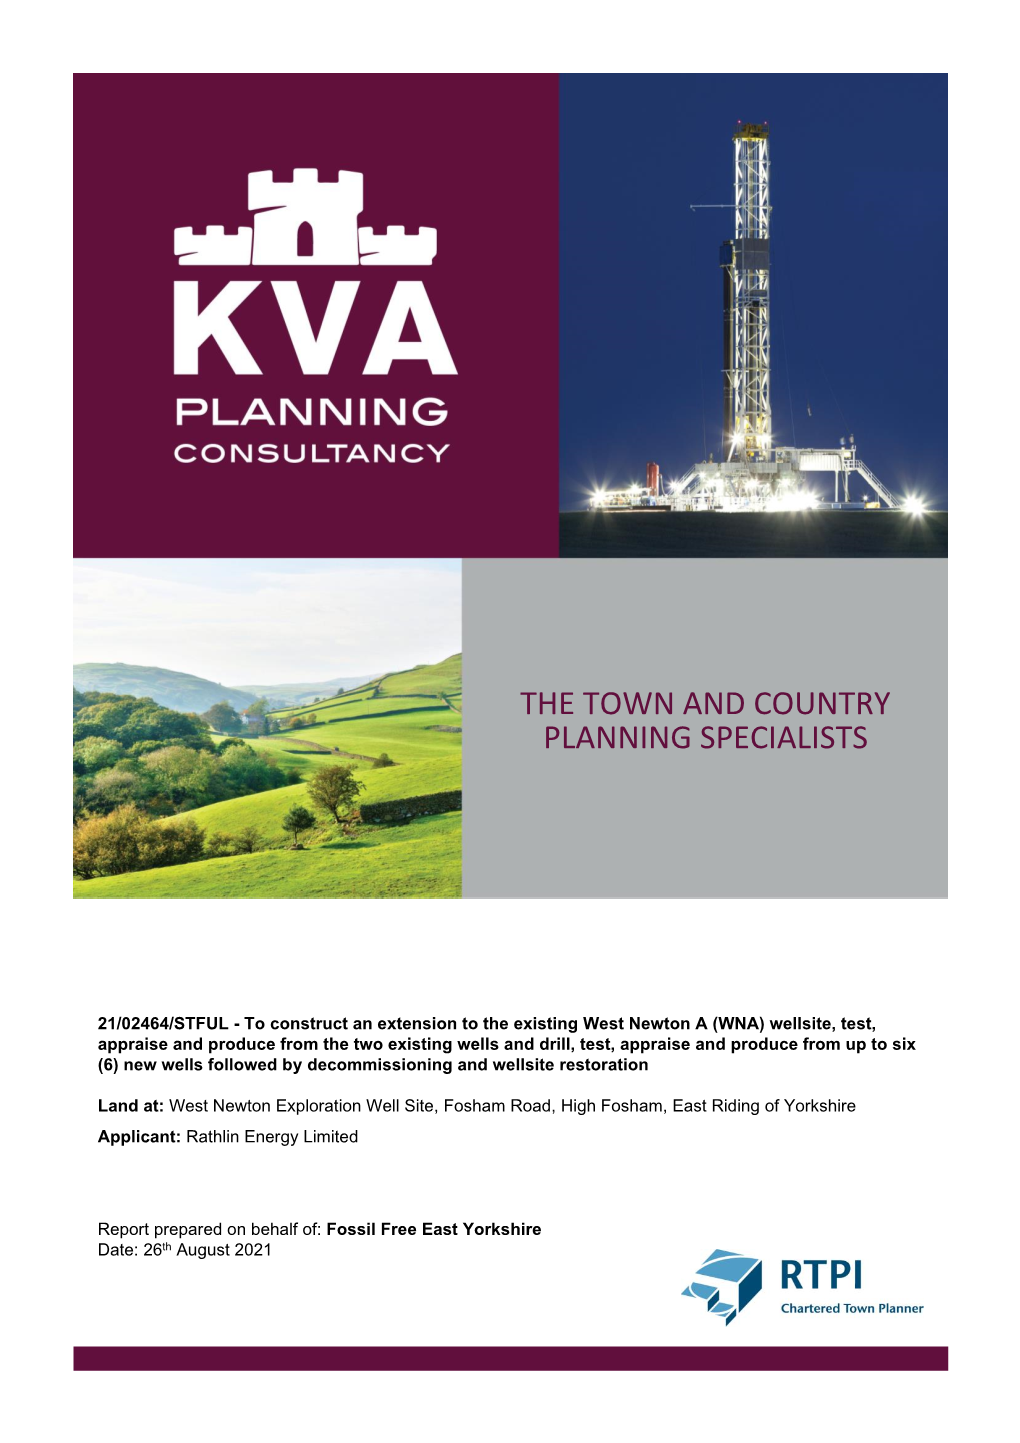 The Town and Country Planning Specialists